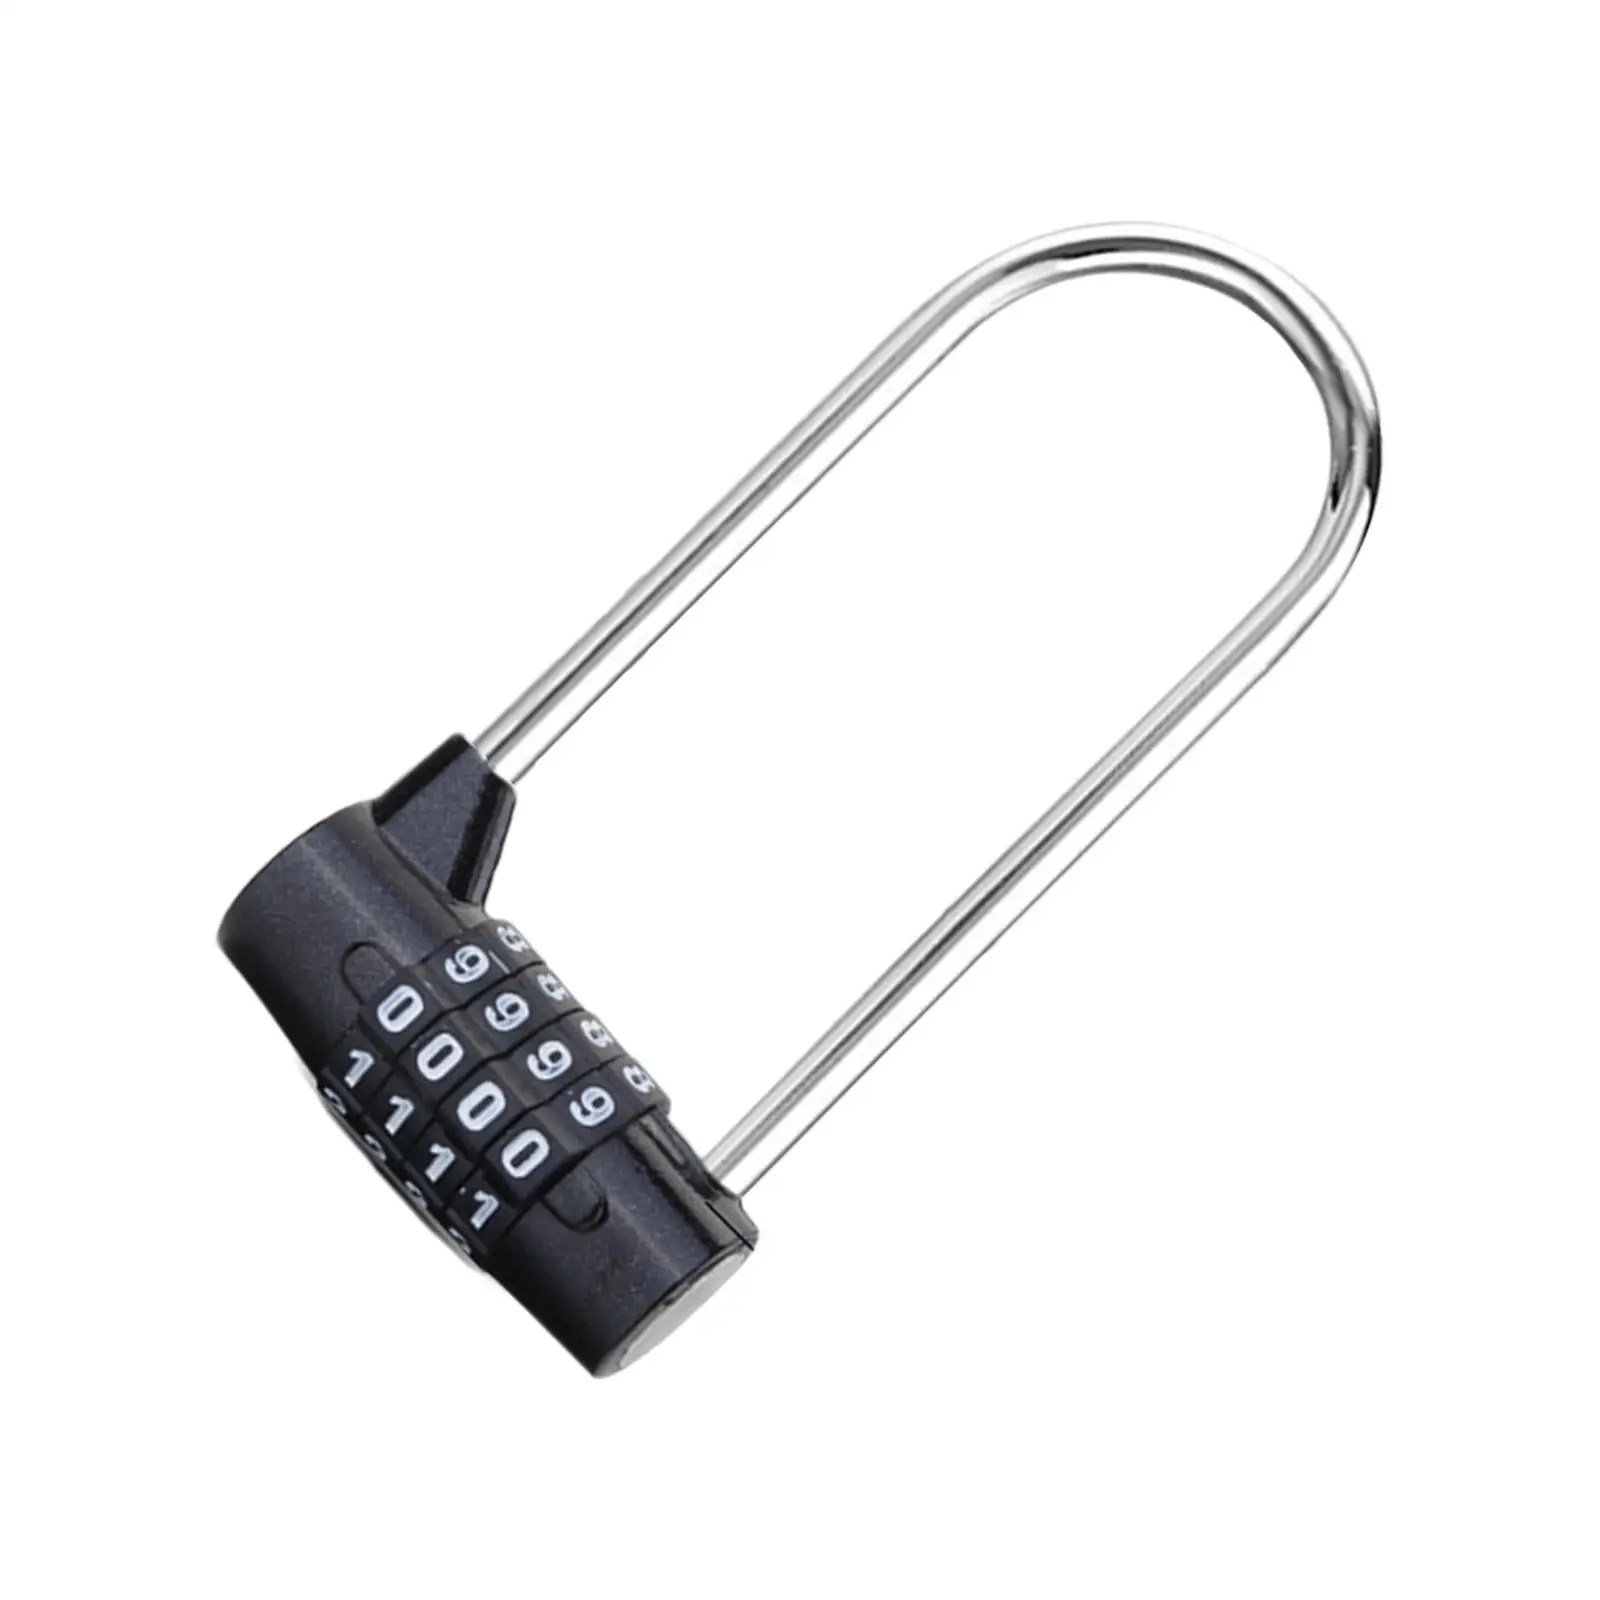 4 Digit Combination Lock Outdoor Safety Lock with Long Shackle Pad Lock for School Locker Fence Toolbox Gym Locker Hasp Cabinet